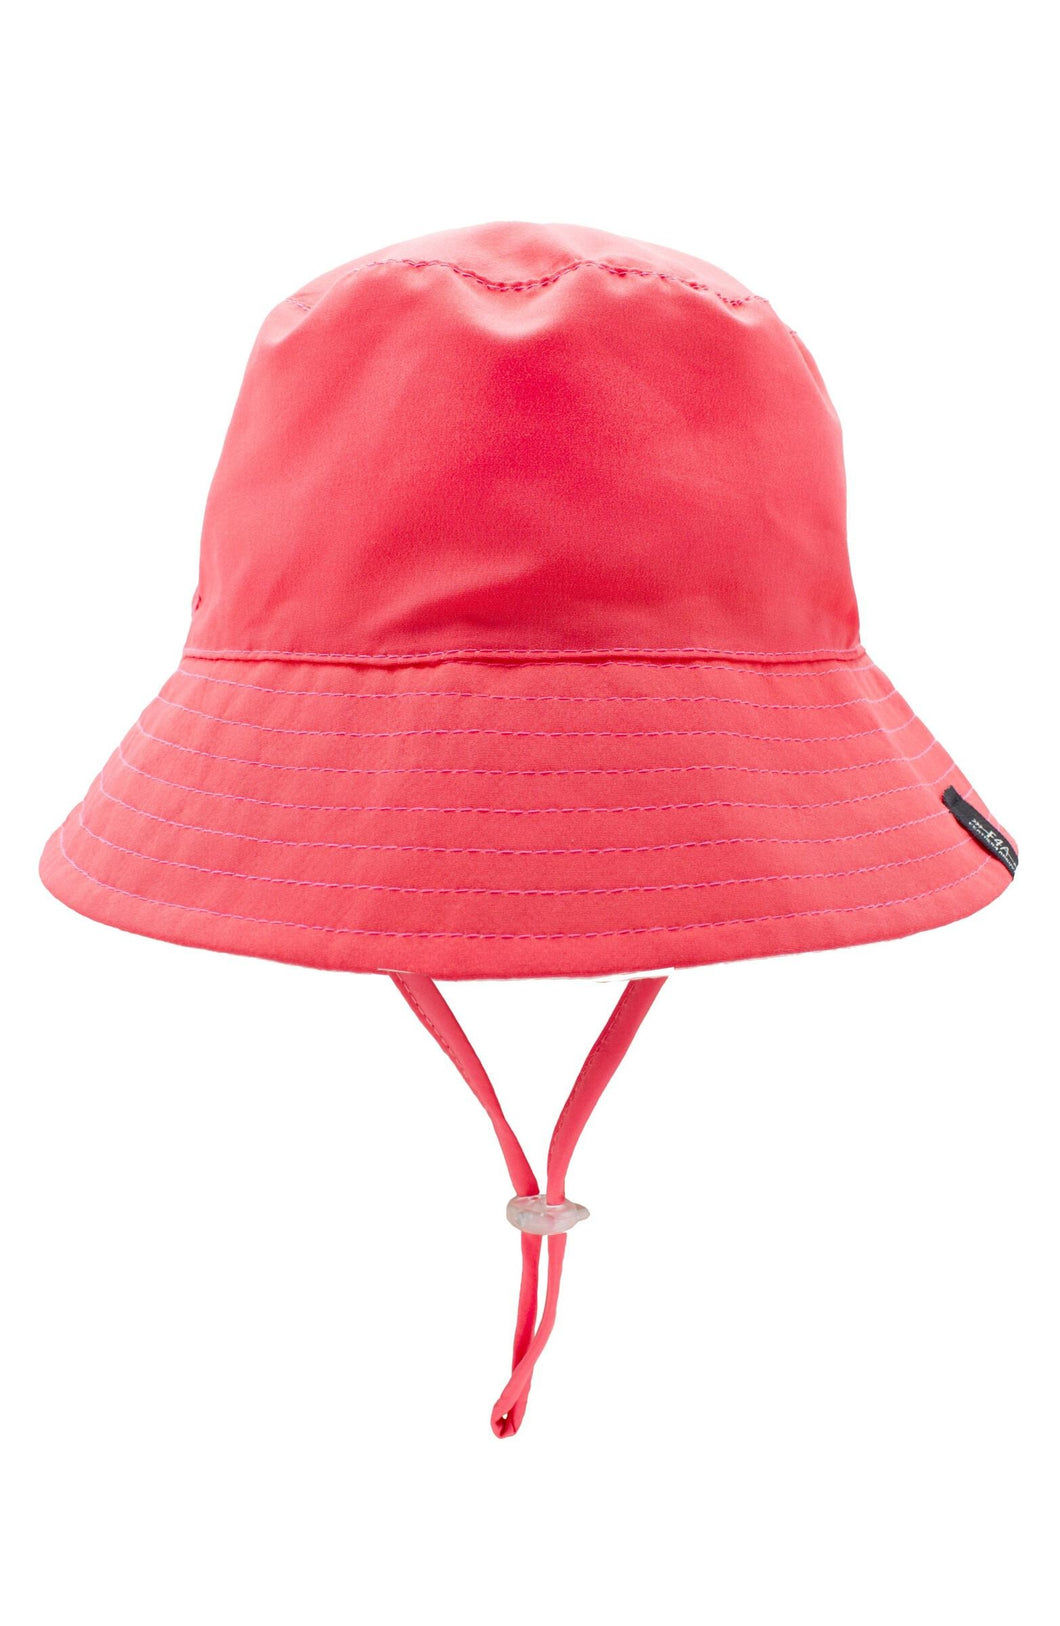 Suns Out Reversible Bucket Hat in Sugar Coral